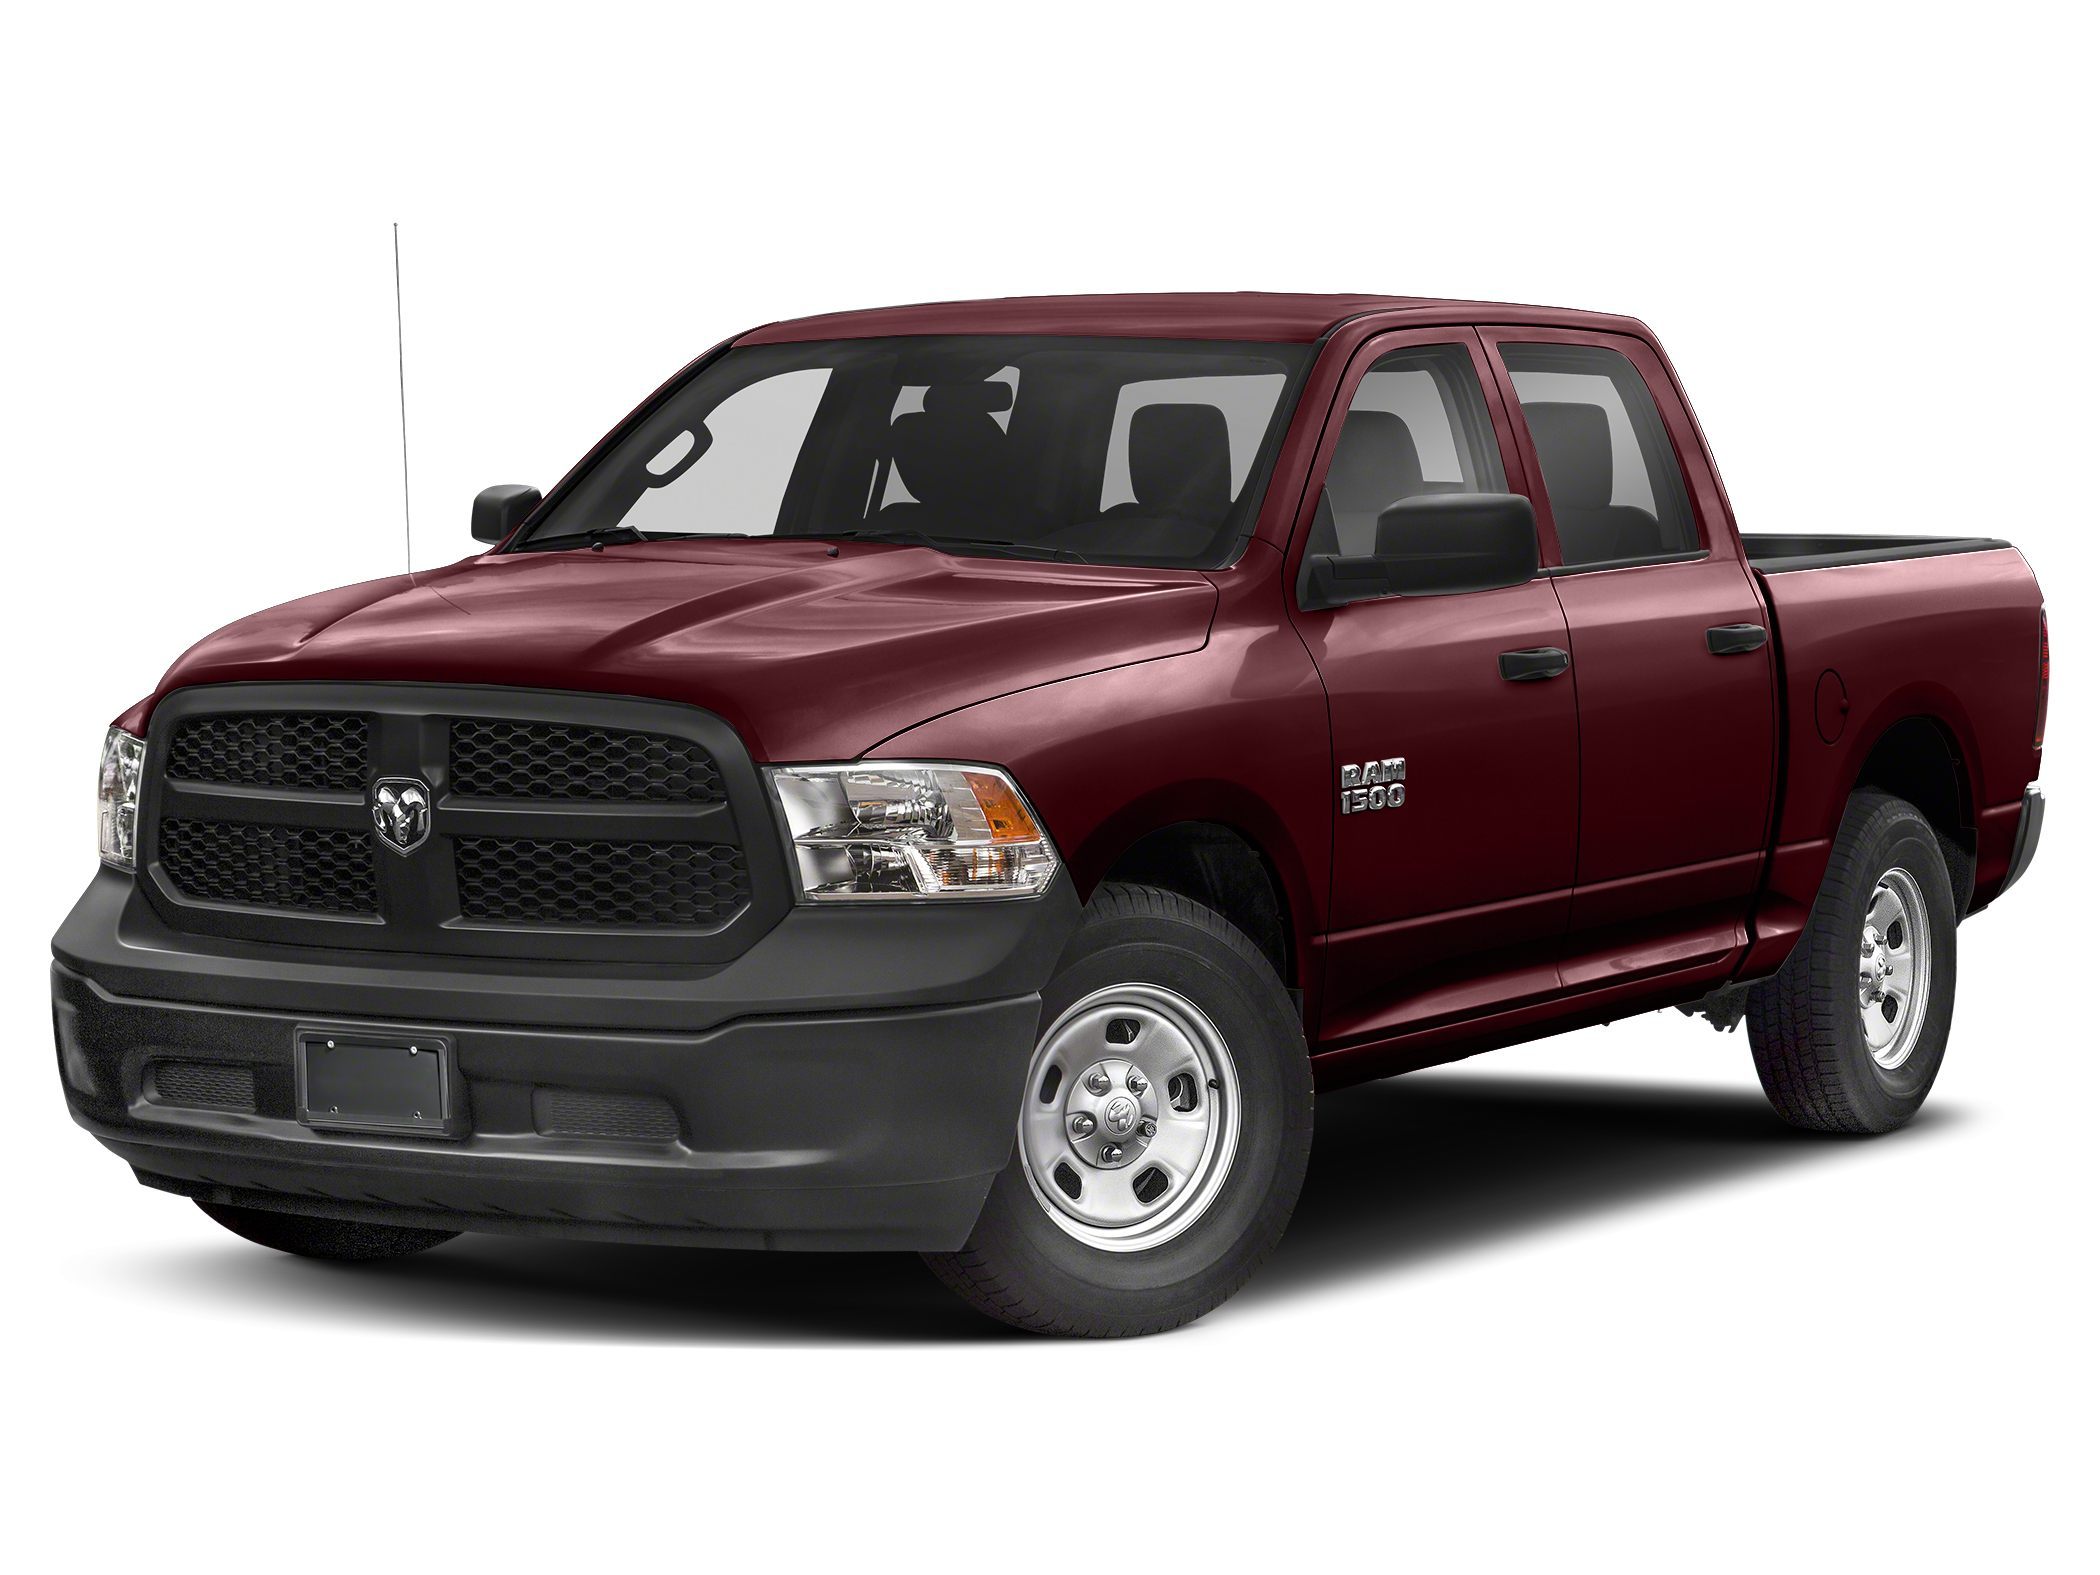 Used 21 Ram 1500 Classic For Sale At J S Autohaus Group Vin 1c6rr7kg1ms